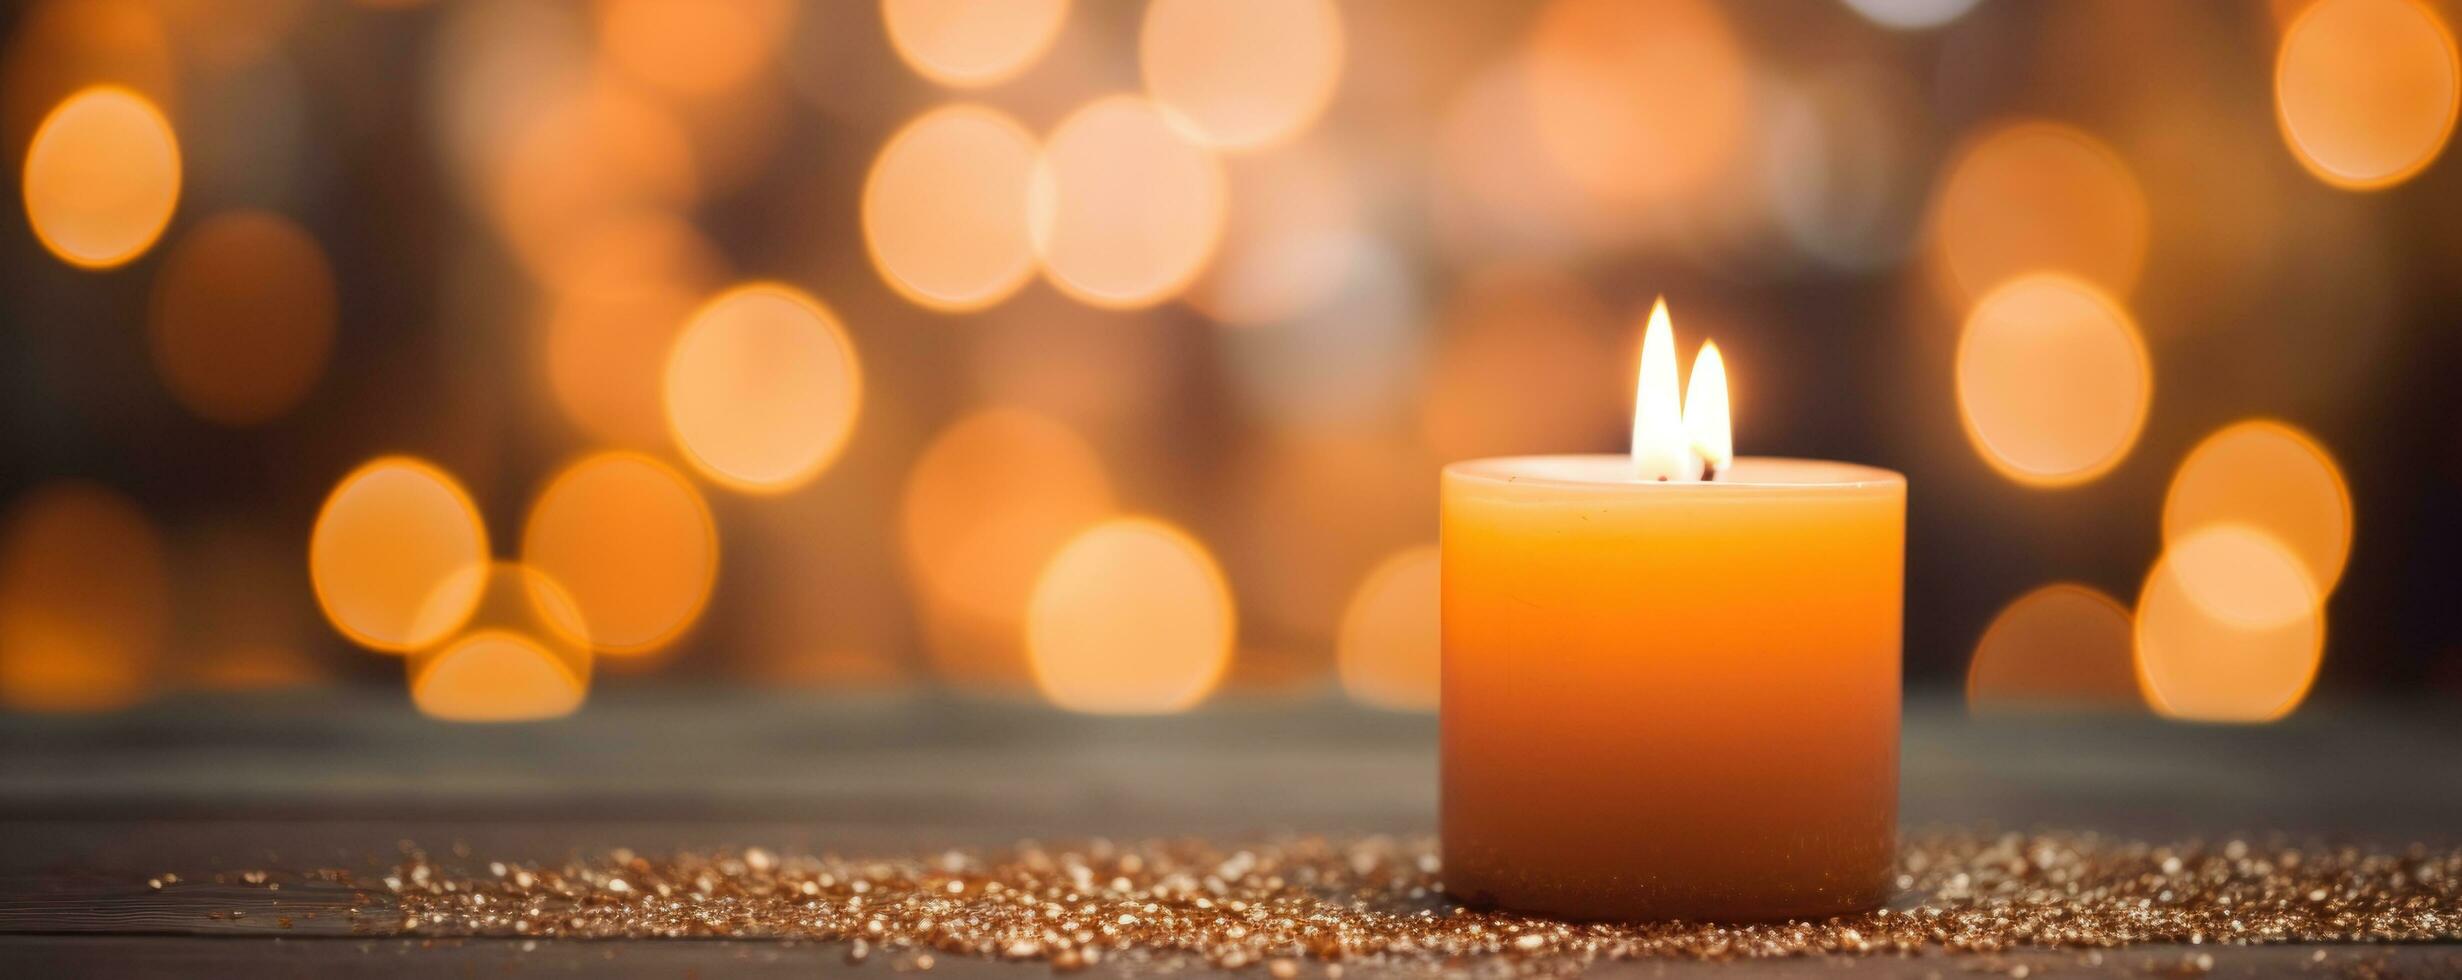 Bokeh background with candles photo